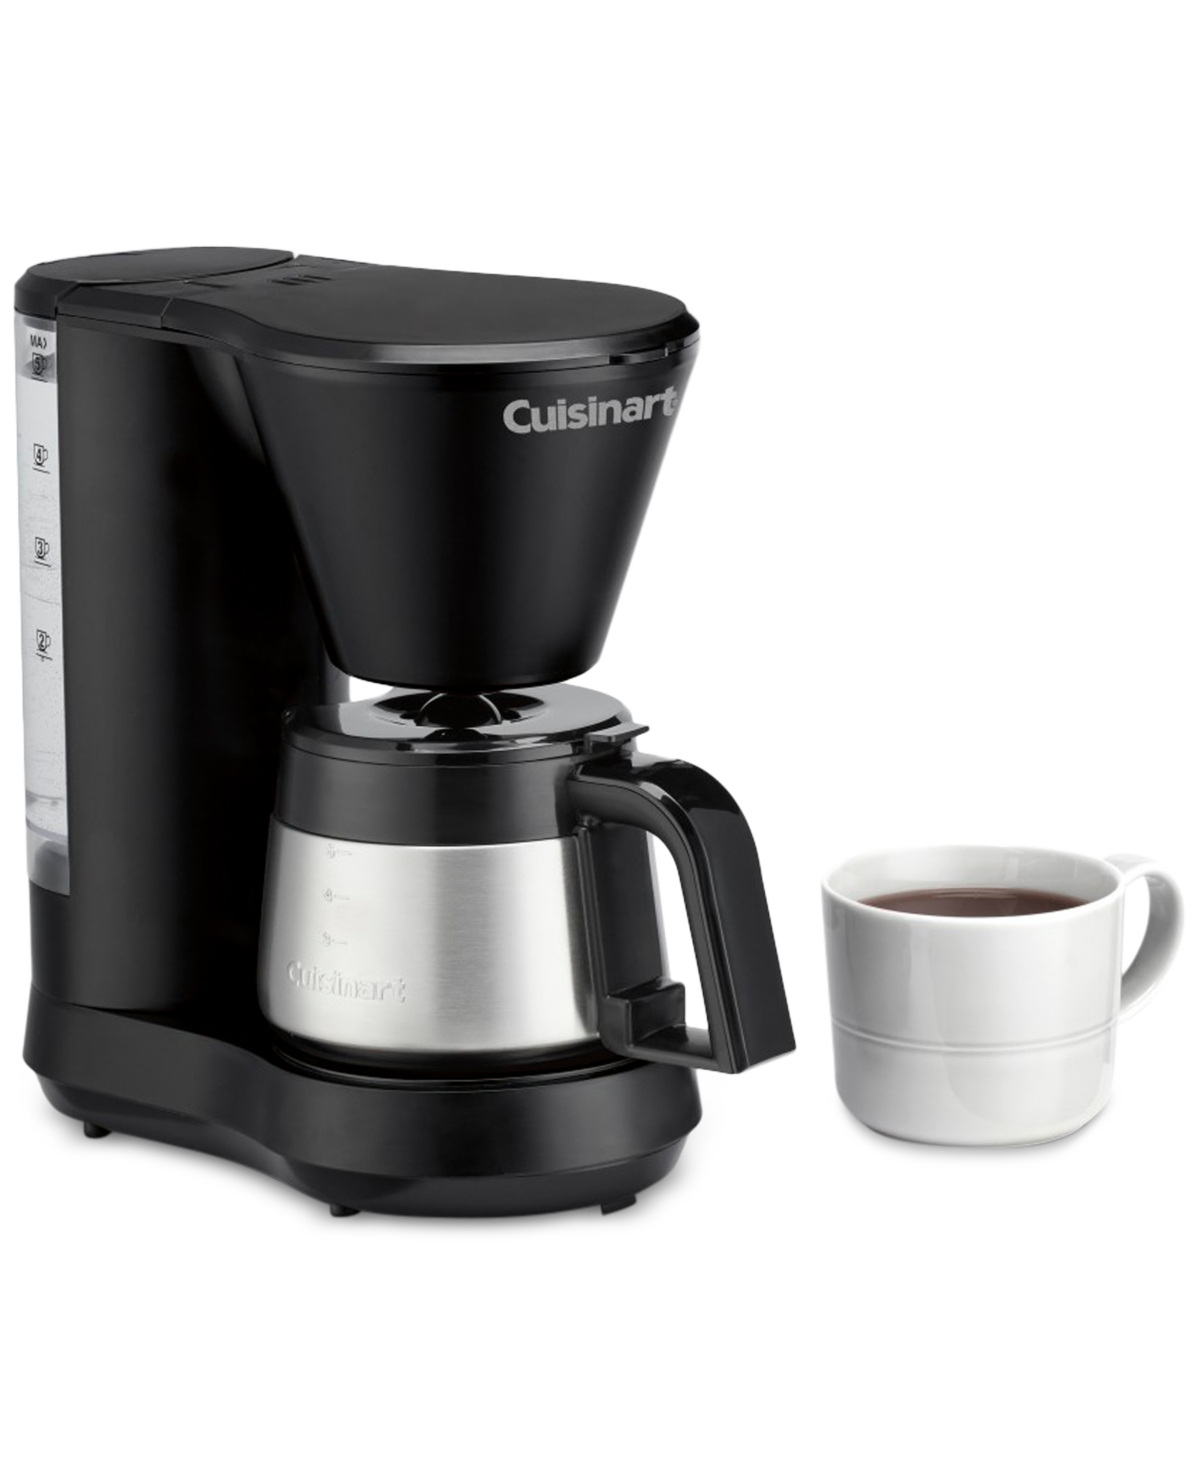 Cuisinart 5-cup Stainless Steel Carafe Coffeemaker In Black